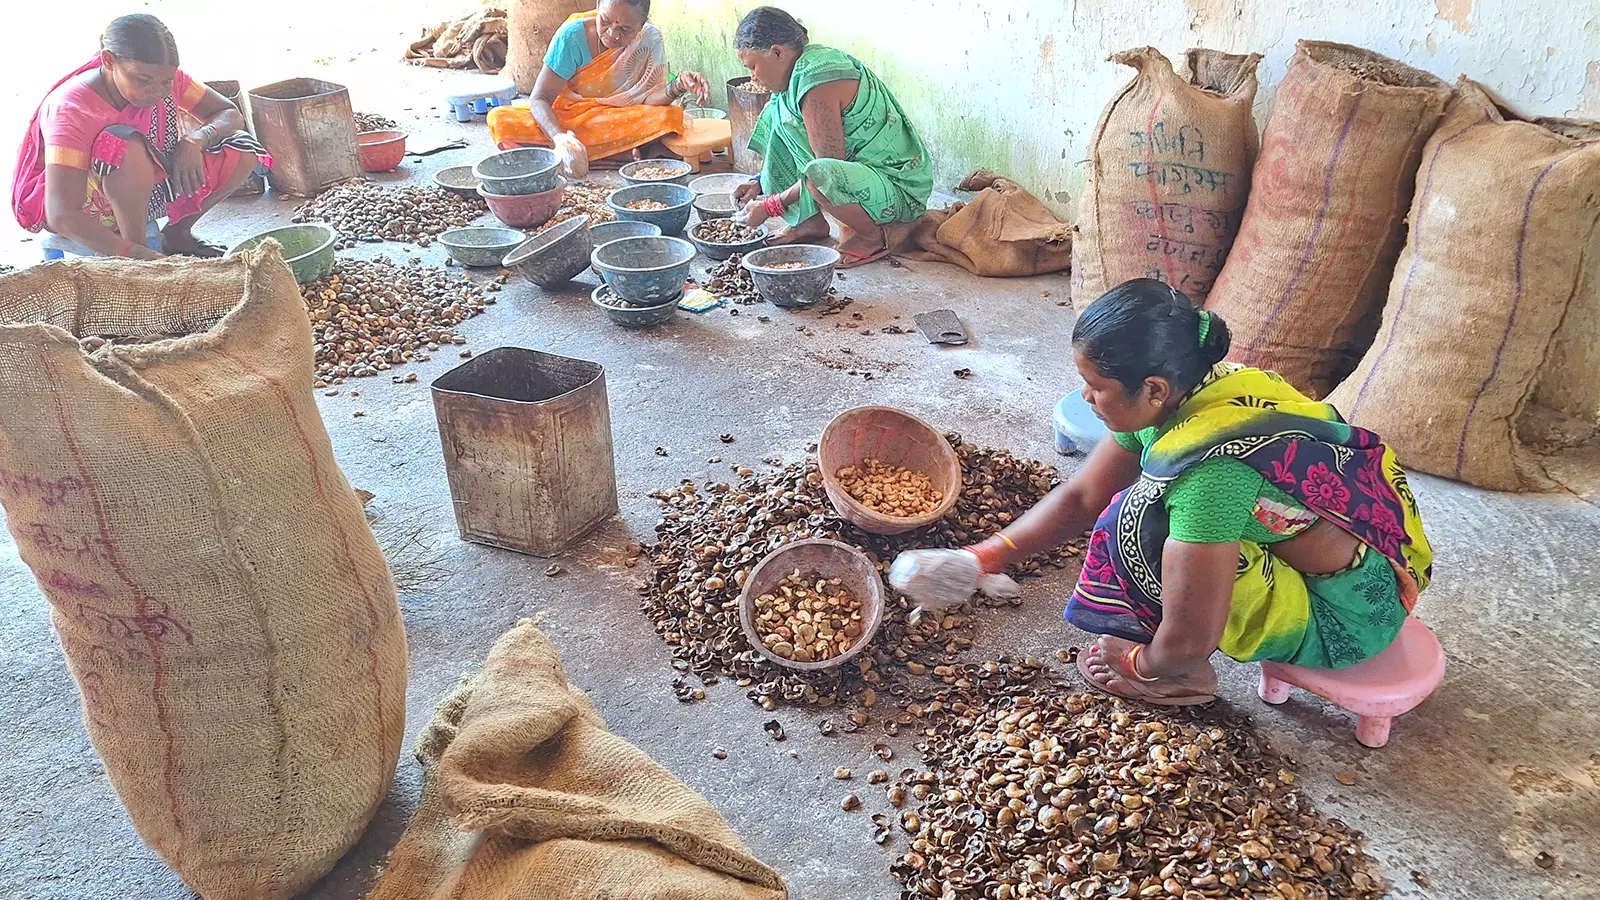 Women scoop cashews from their shells. The Bakawand operation remains largely labour intensive. Photos: Himanshu Joshi